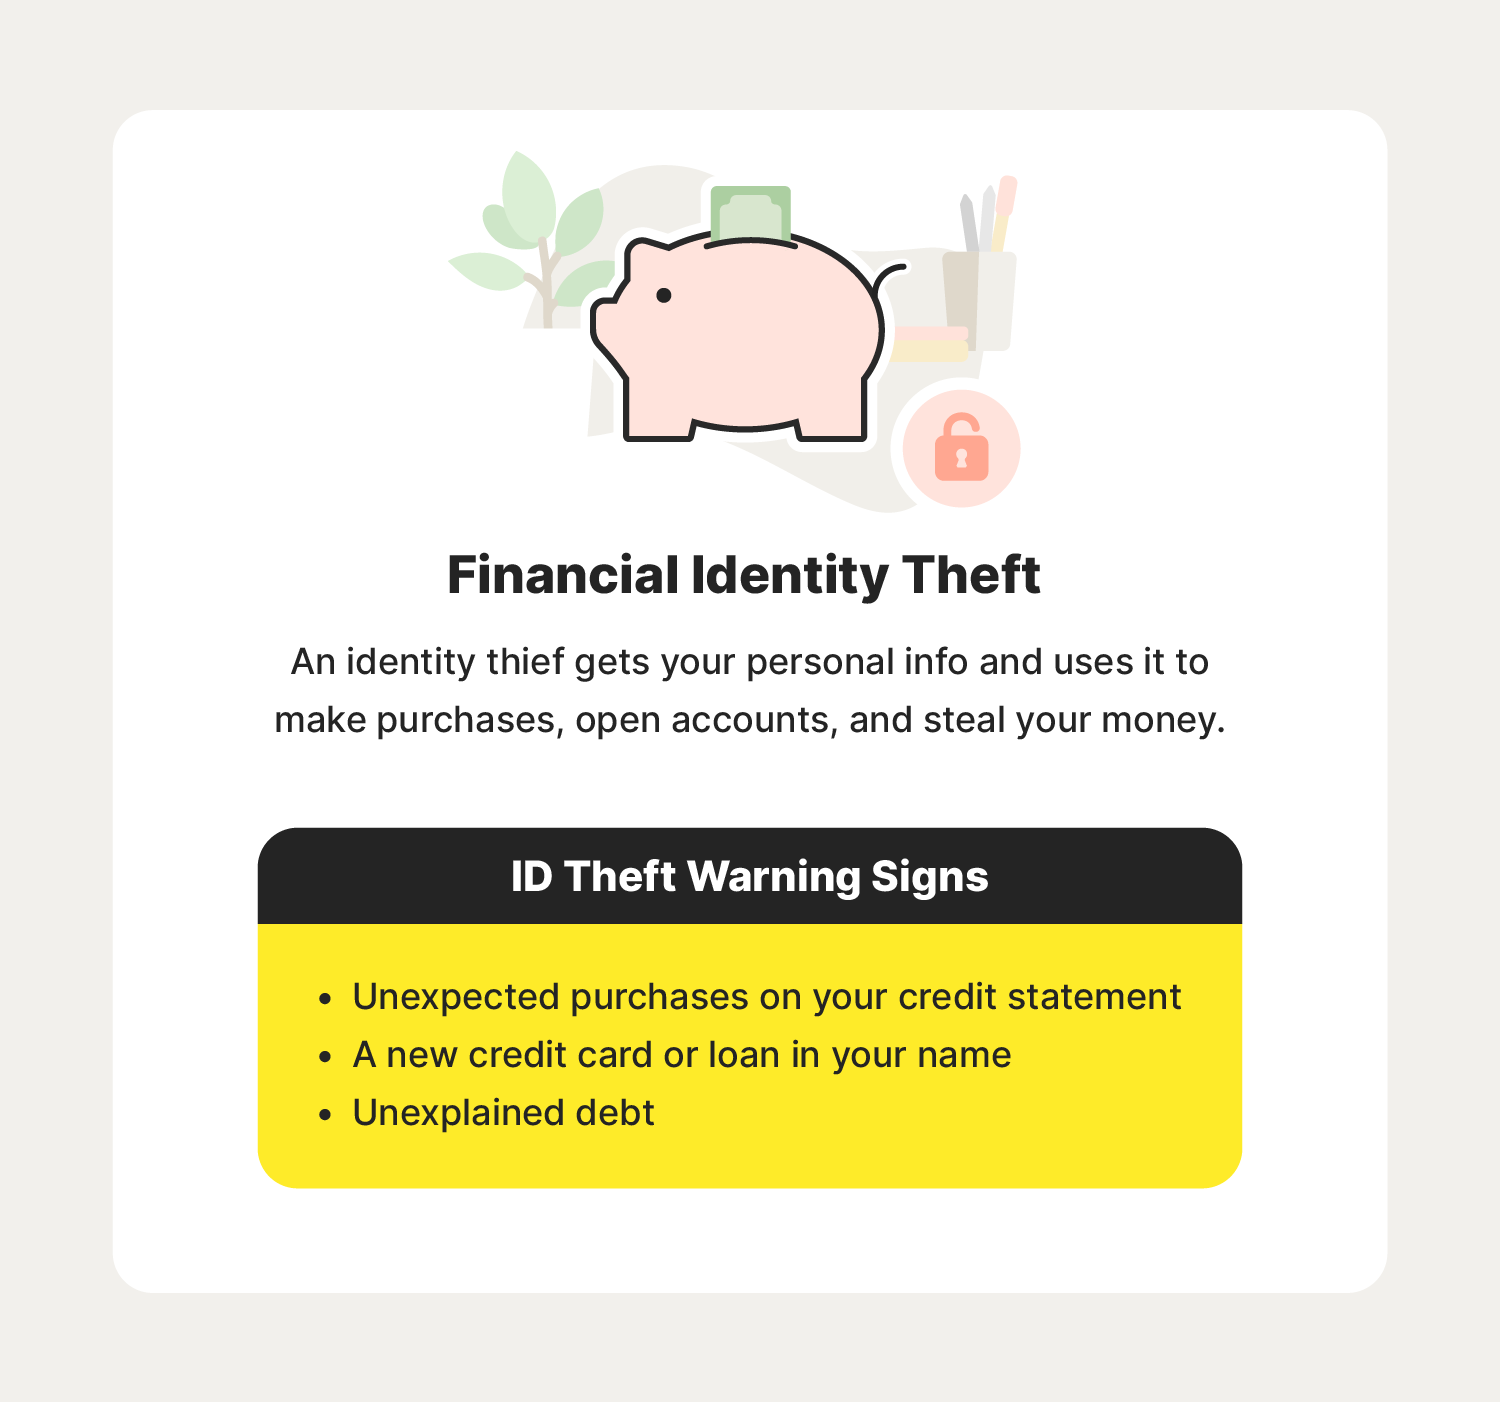 A graphic describes financial identity theft, a type of identity theft to keep an eye on when learning how to avoid identity theft.